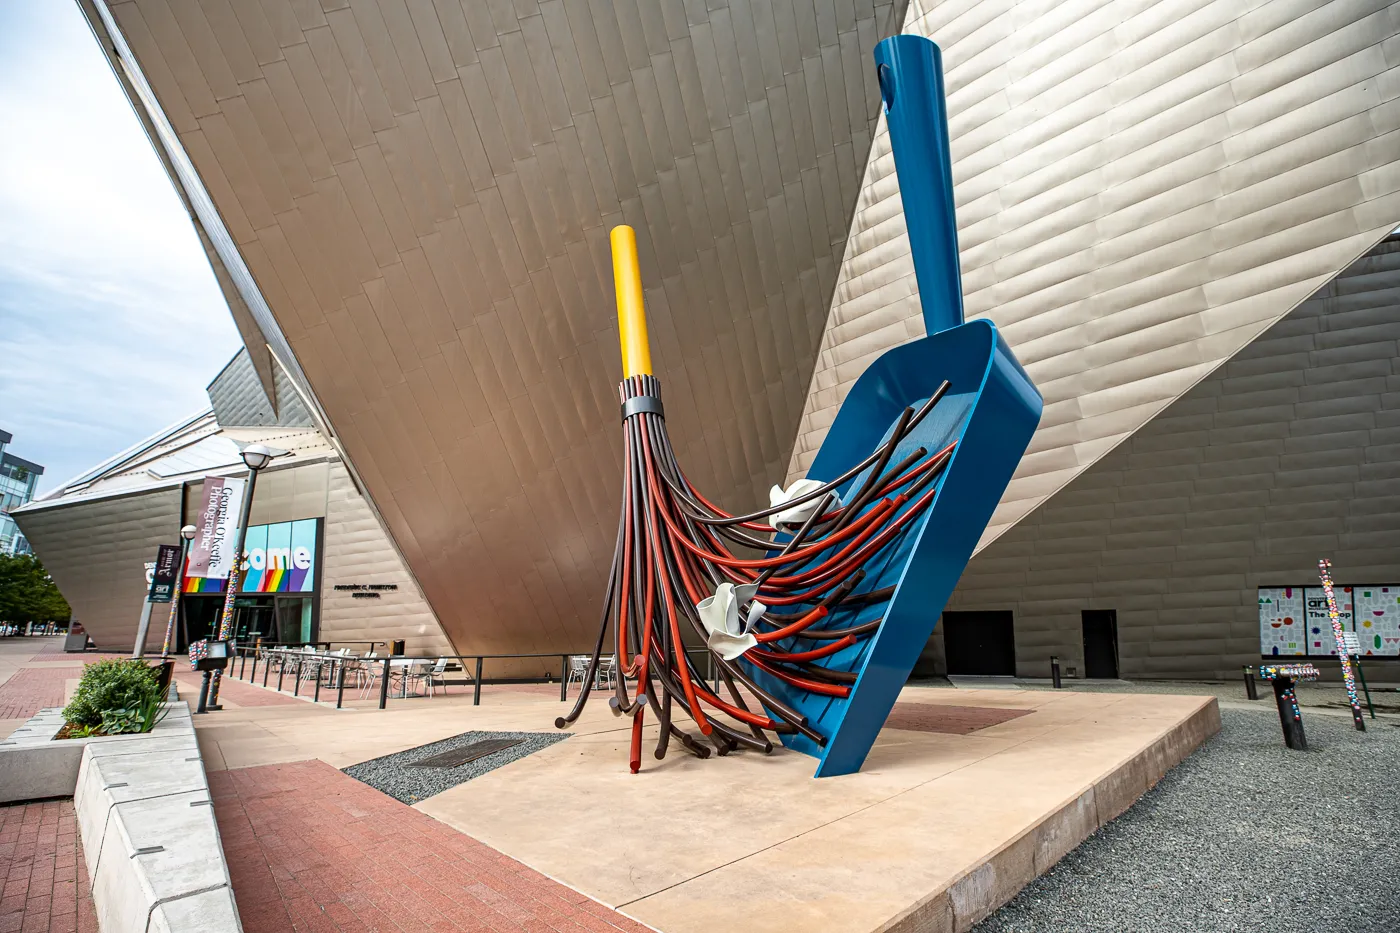 Big Sweep in Denver, Colorado - Giant dustpan and broom roadside attraction at the Denver Art Museum